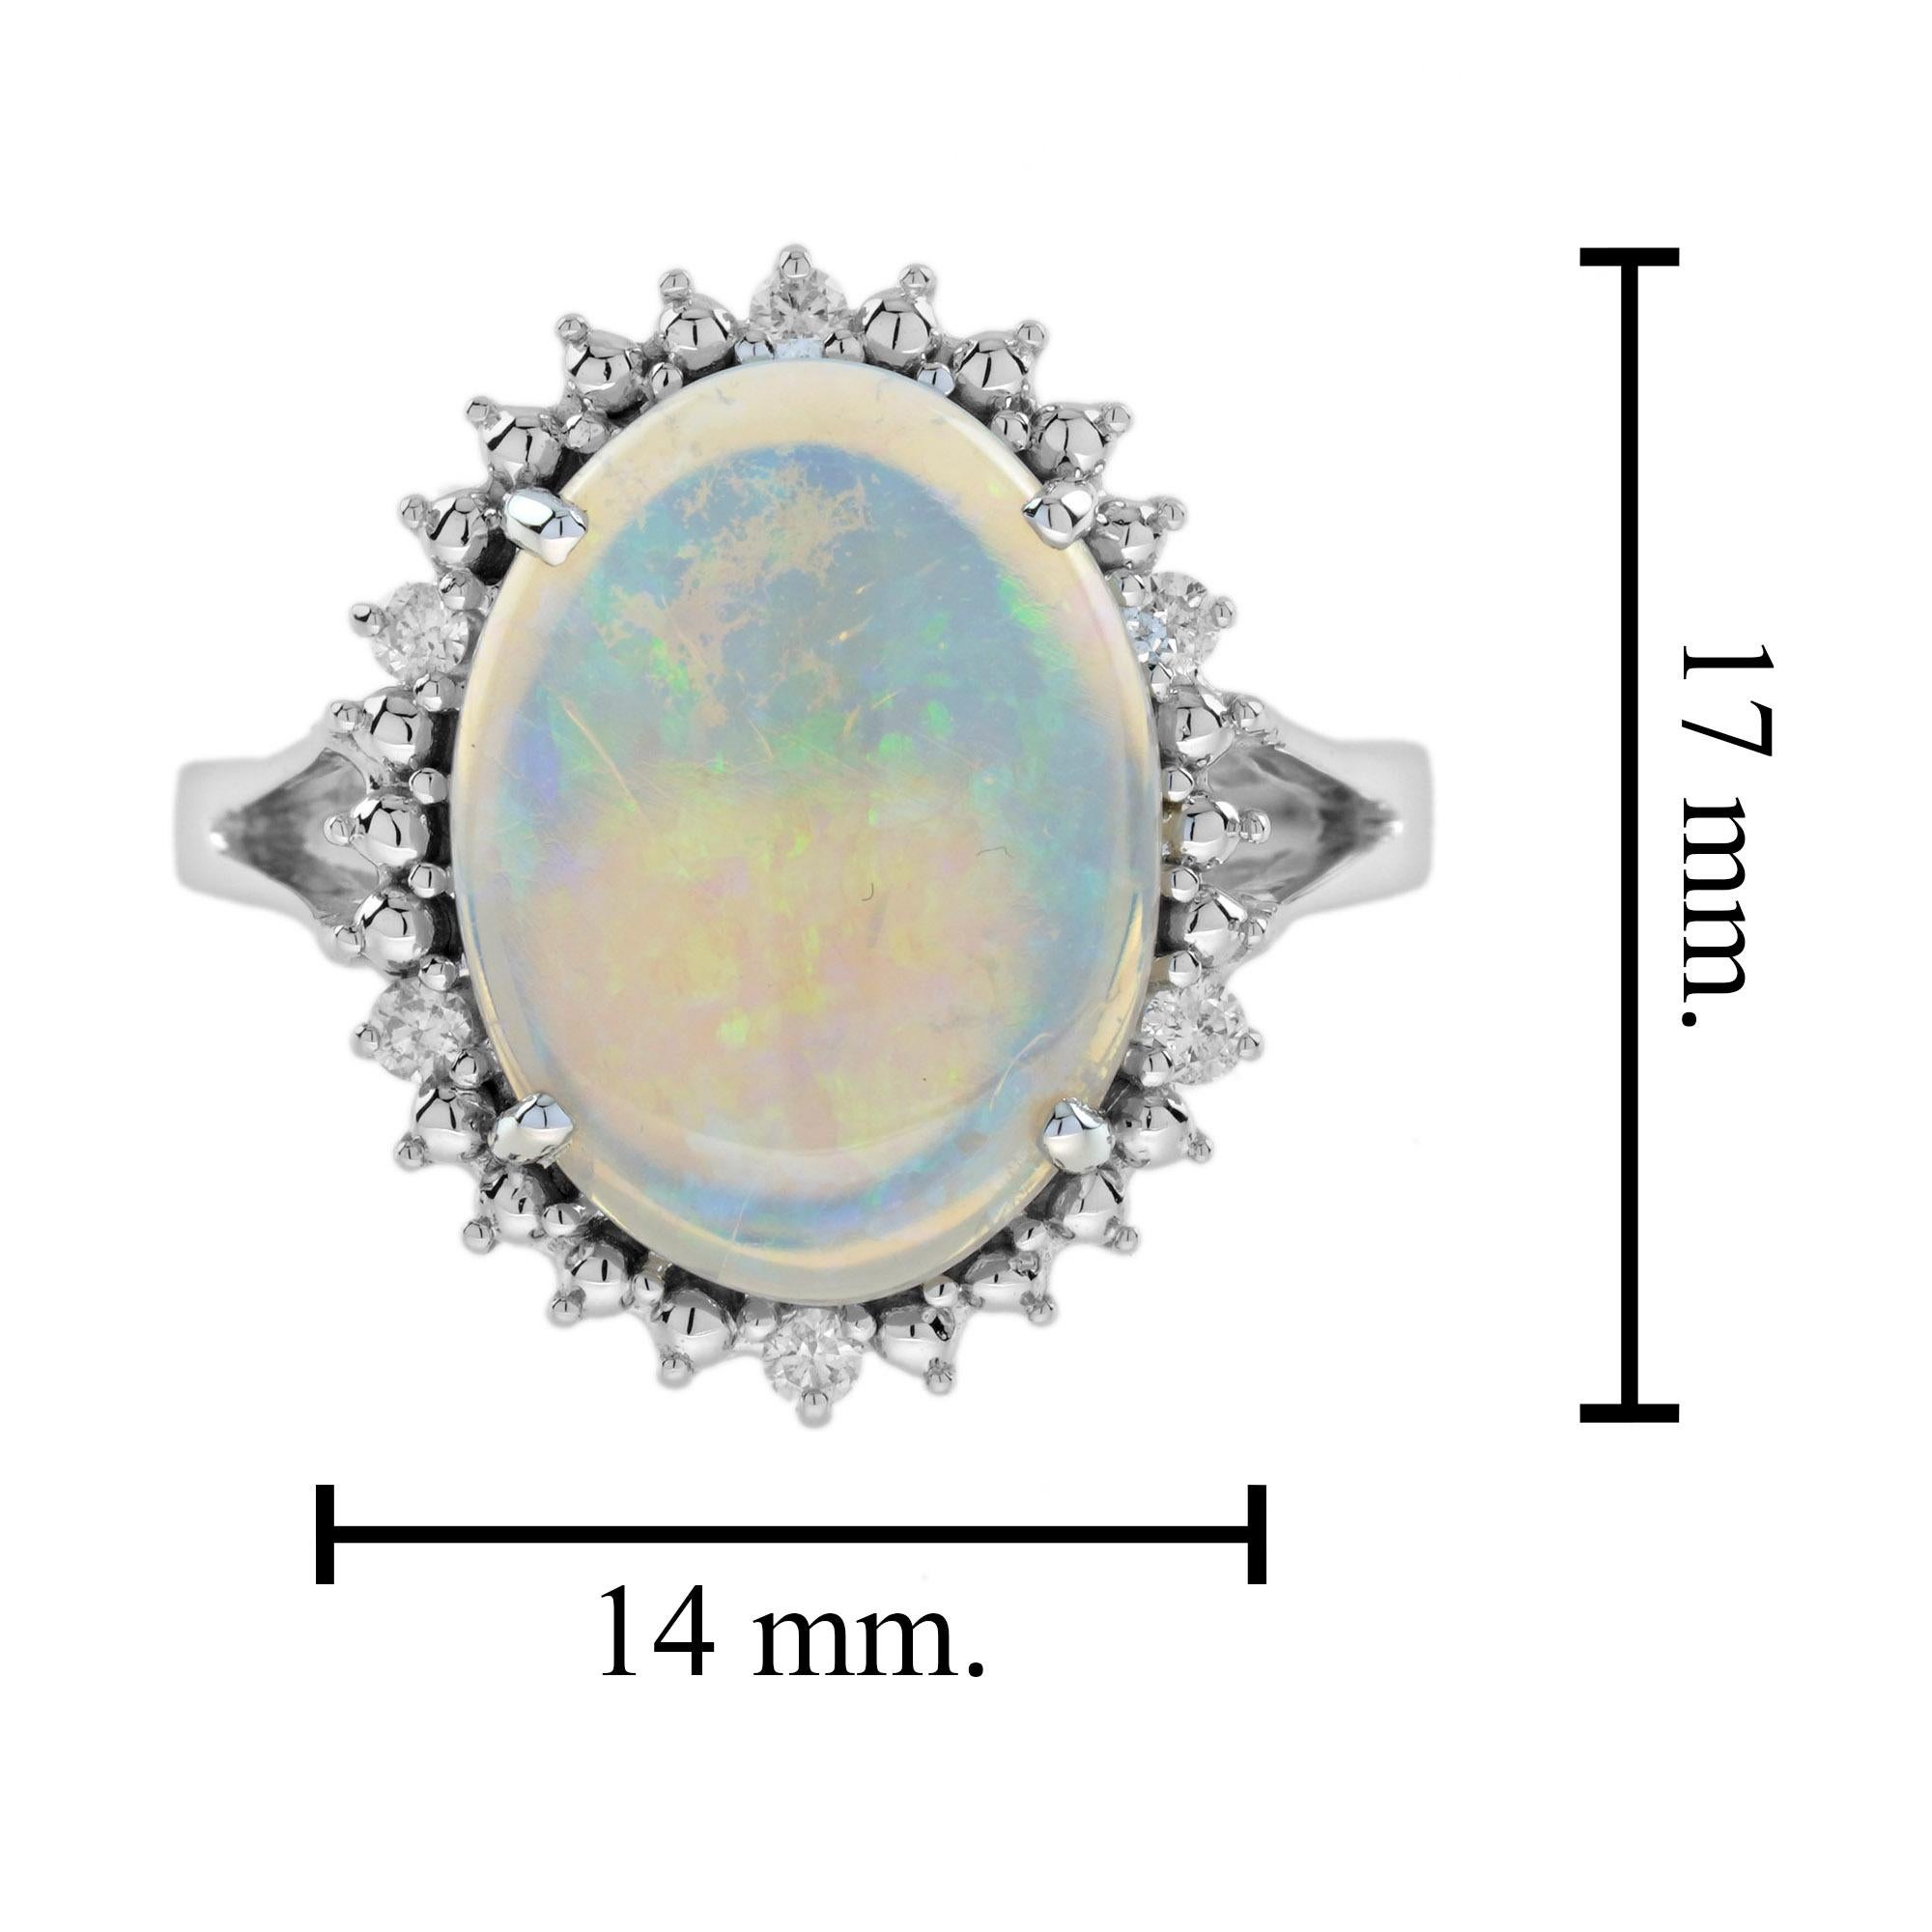 2.53 Ct. Opal and Diamond Vintage Style Cocktail Ring in 9K White Gold 2